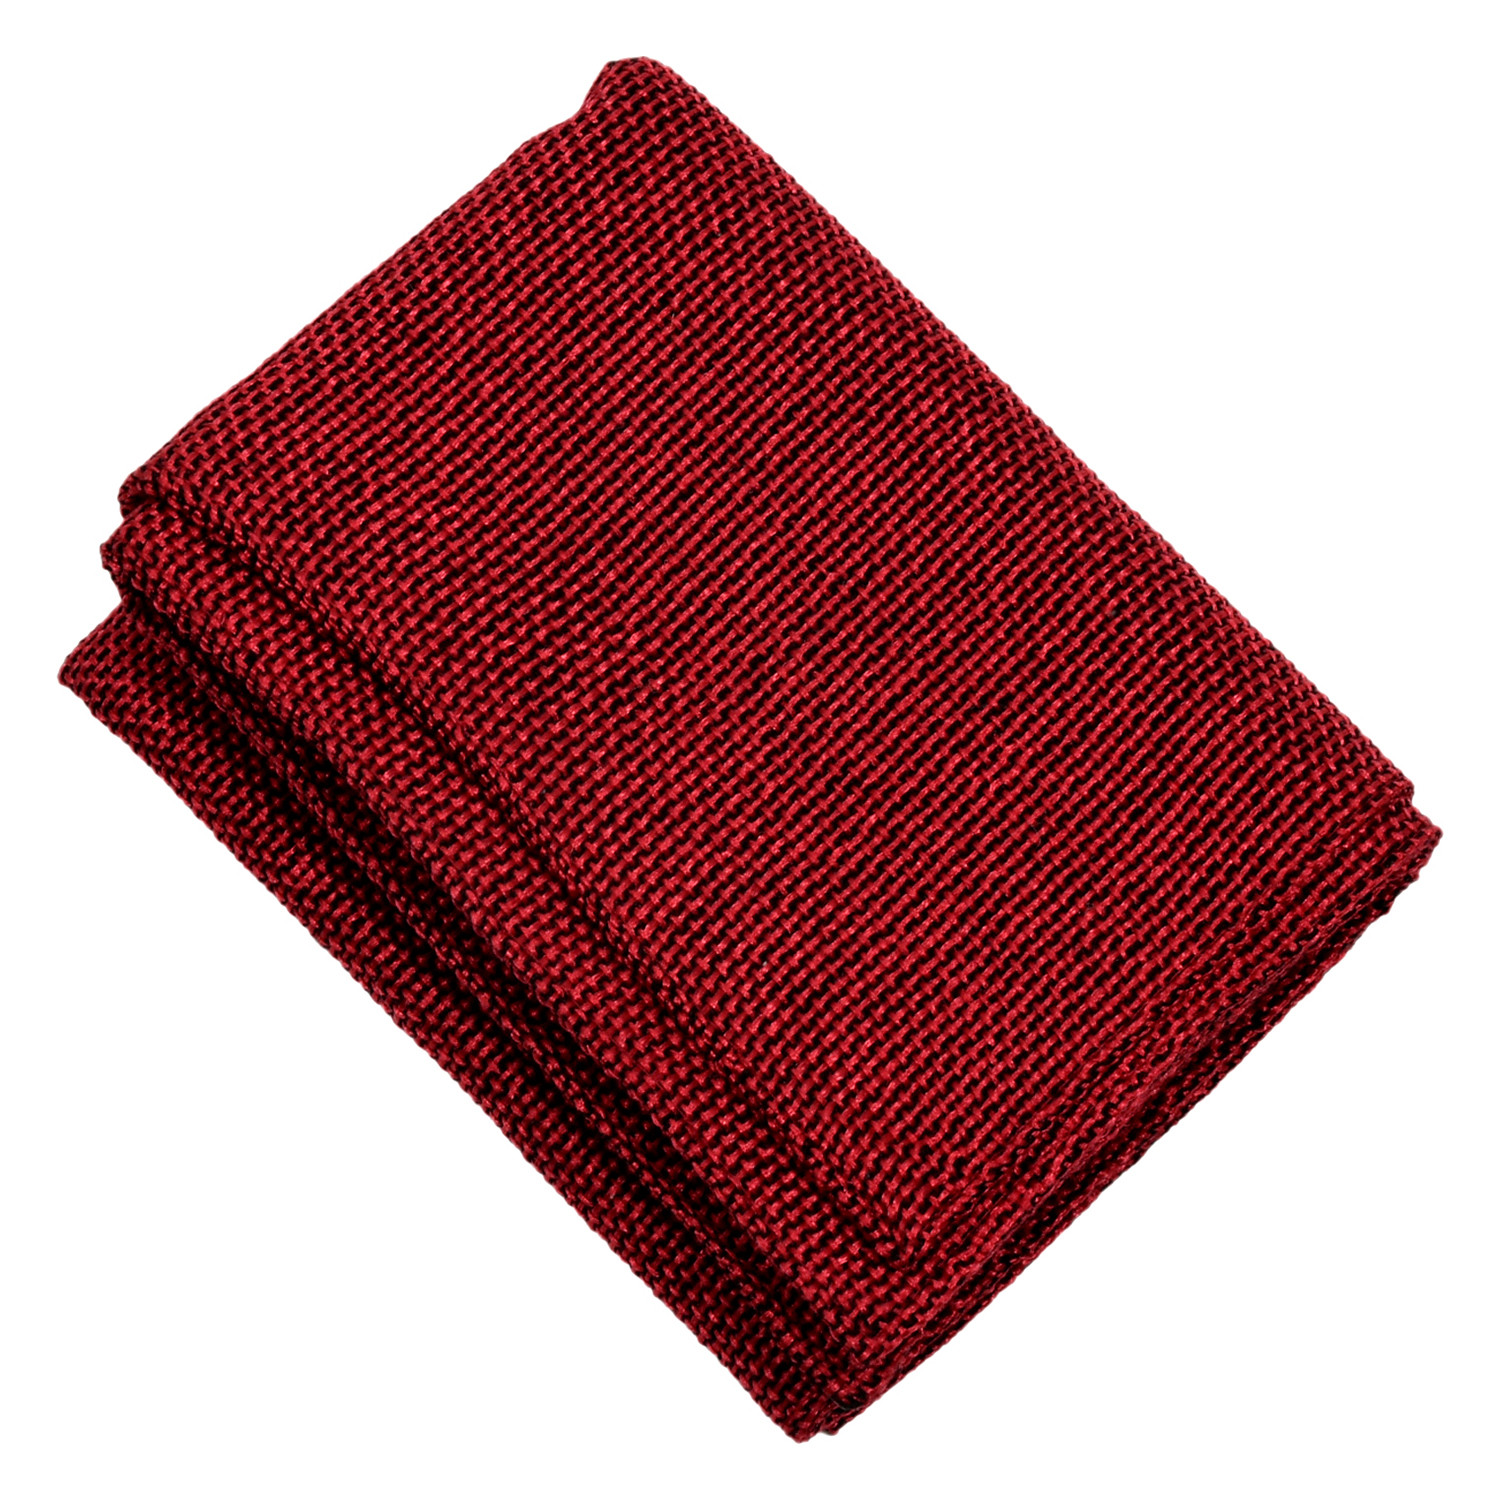 Kuber Industries Jute Table Placemat for Home, Hotels, Set of 6 (Maroon)